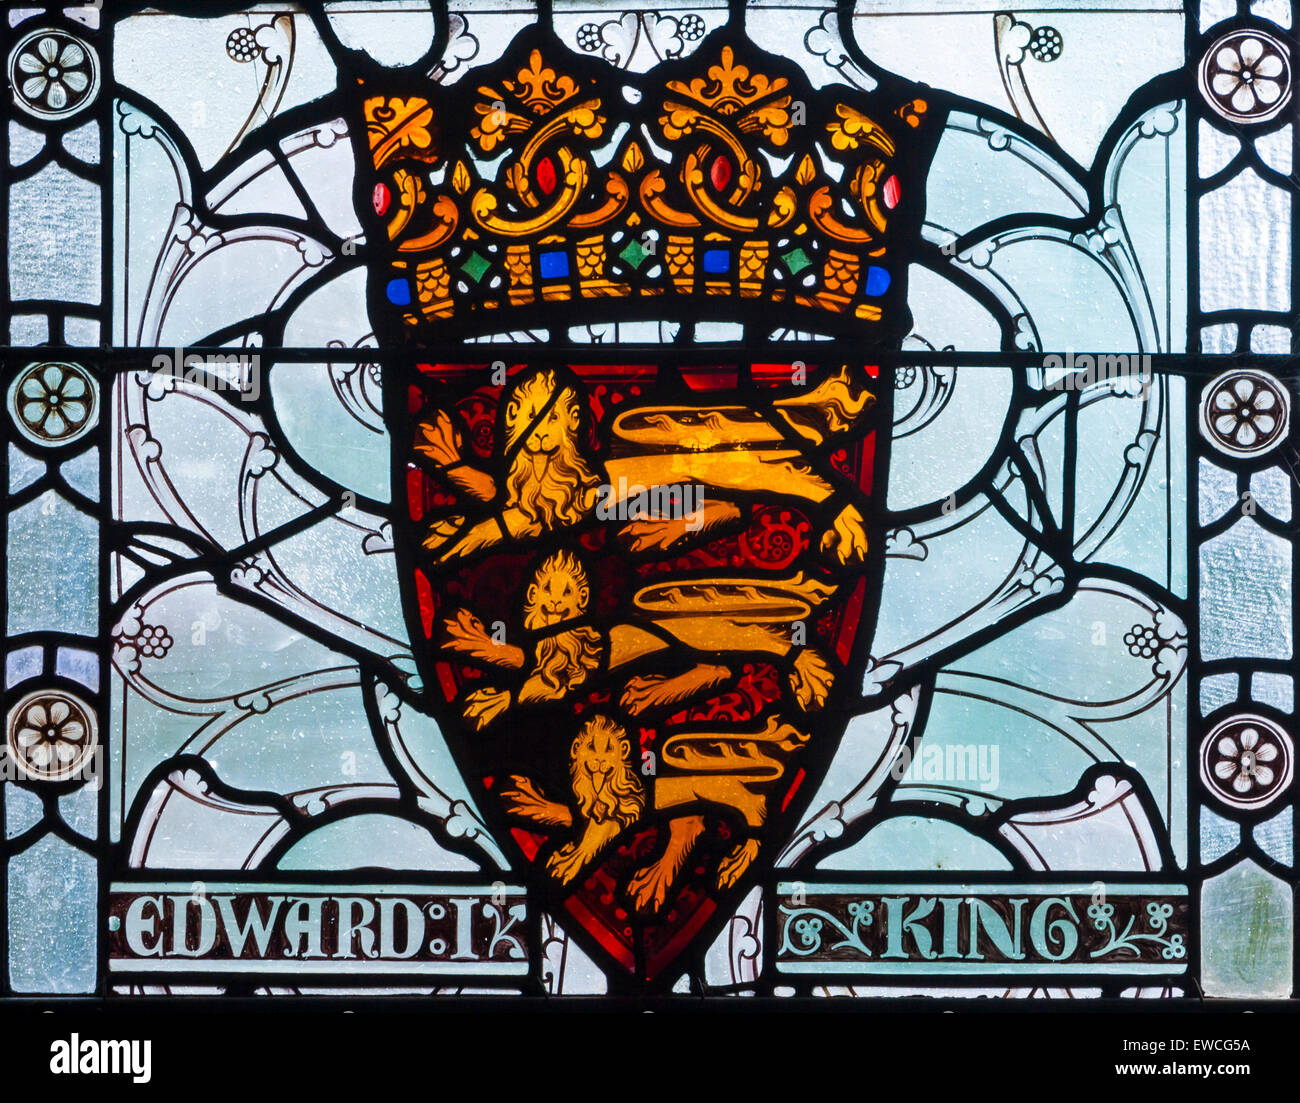 Stained glass window with the names King Edward I in The Great Hall in Winchester England, UK Stock Photo